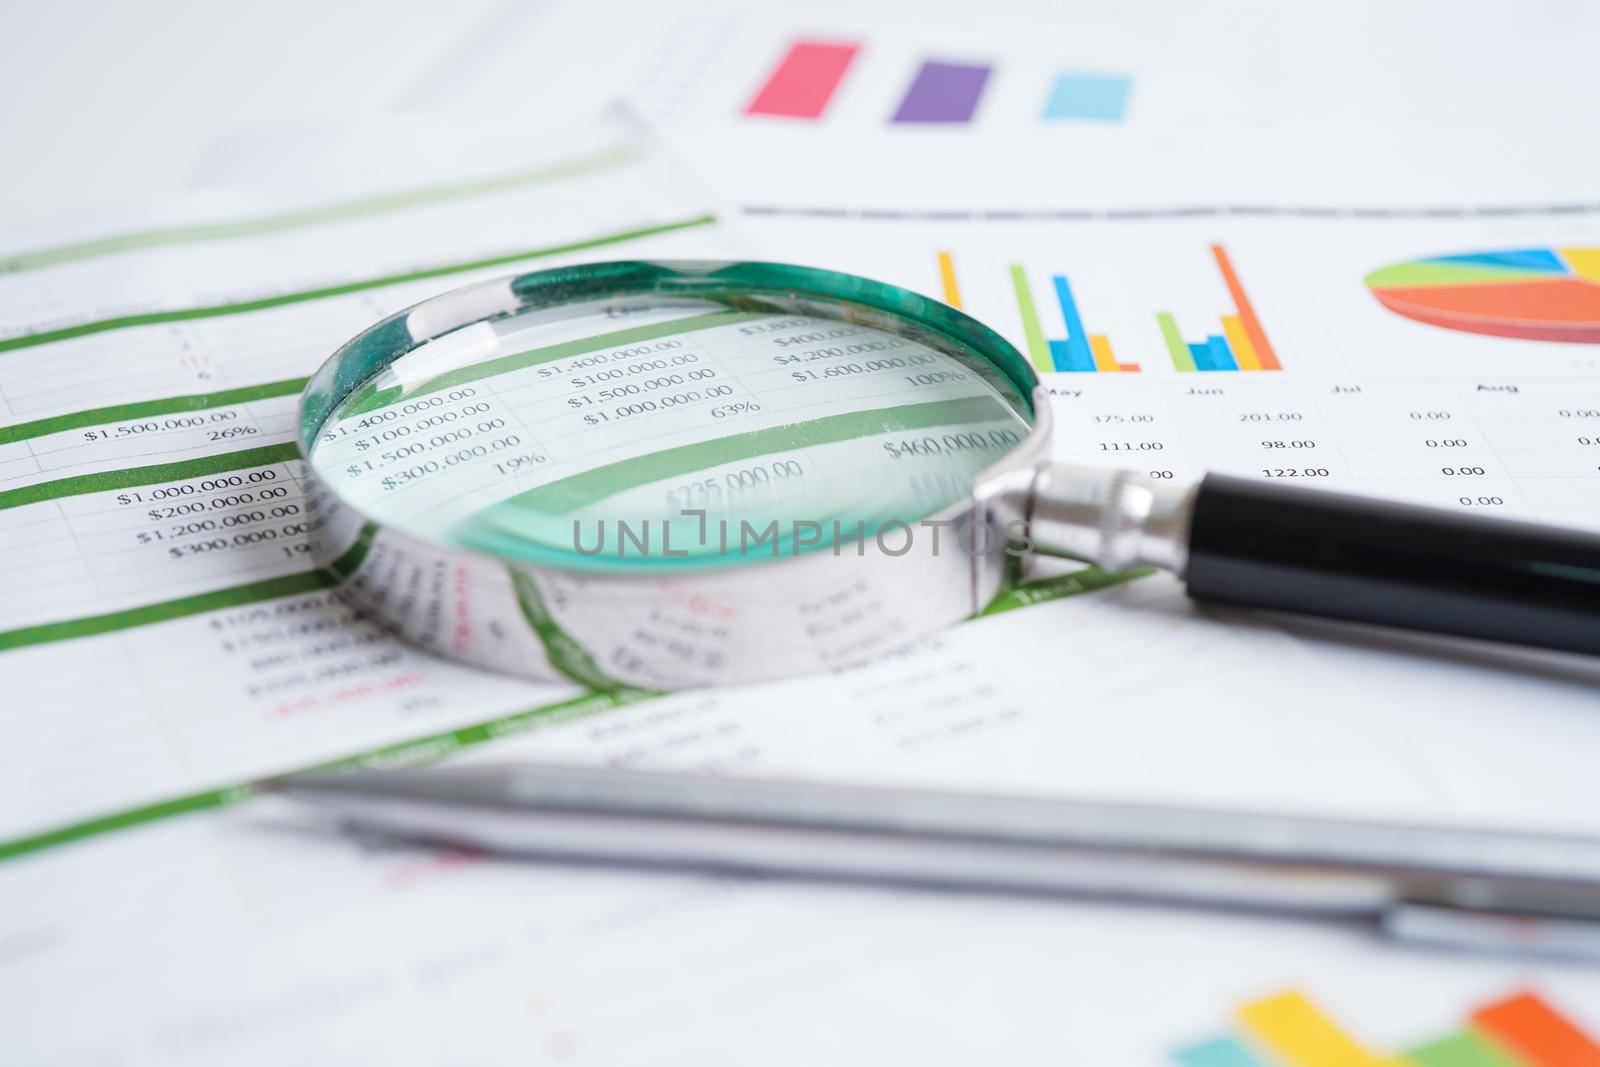 Magnifying glass on charts graphs paper. Financial development, Banking Account, Statistics, Investment Analytic research data economy.